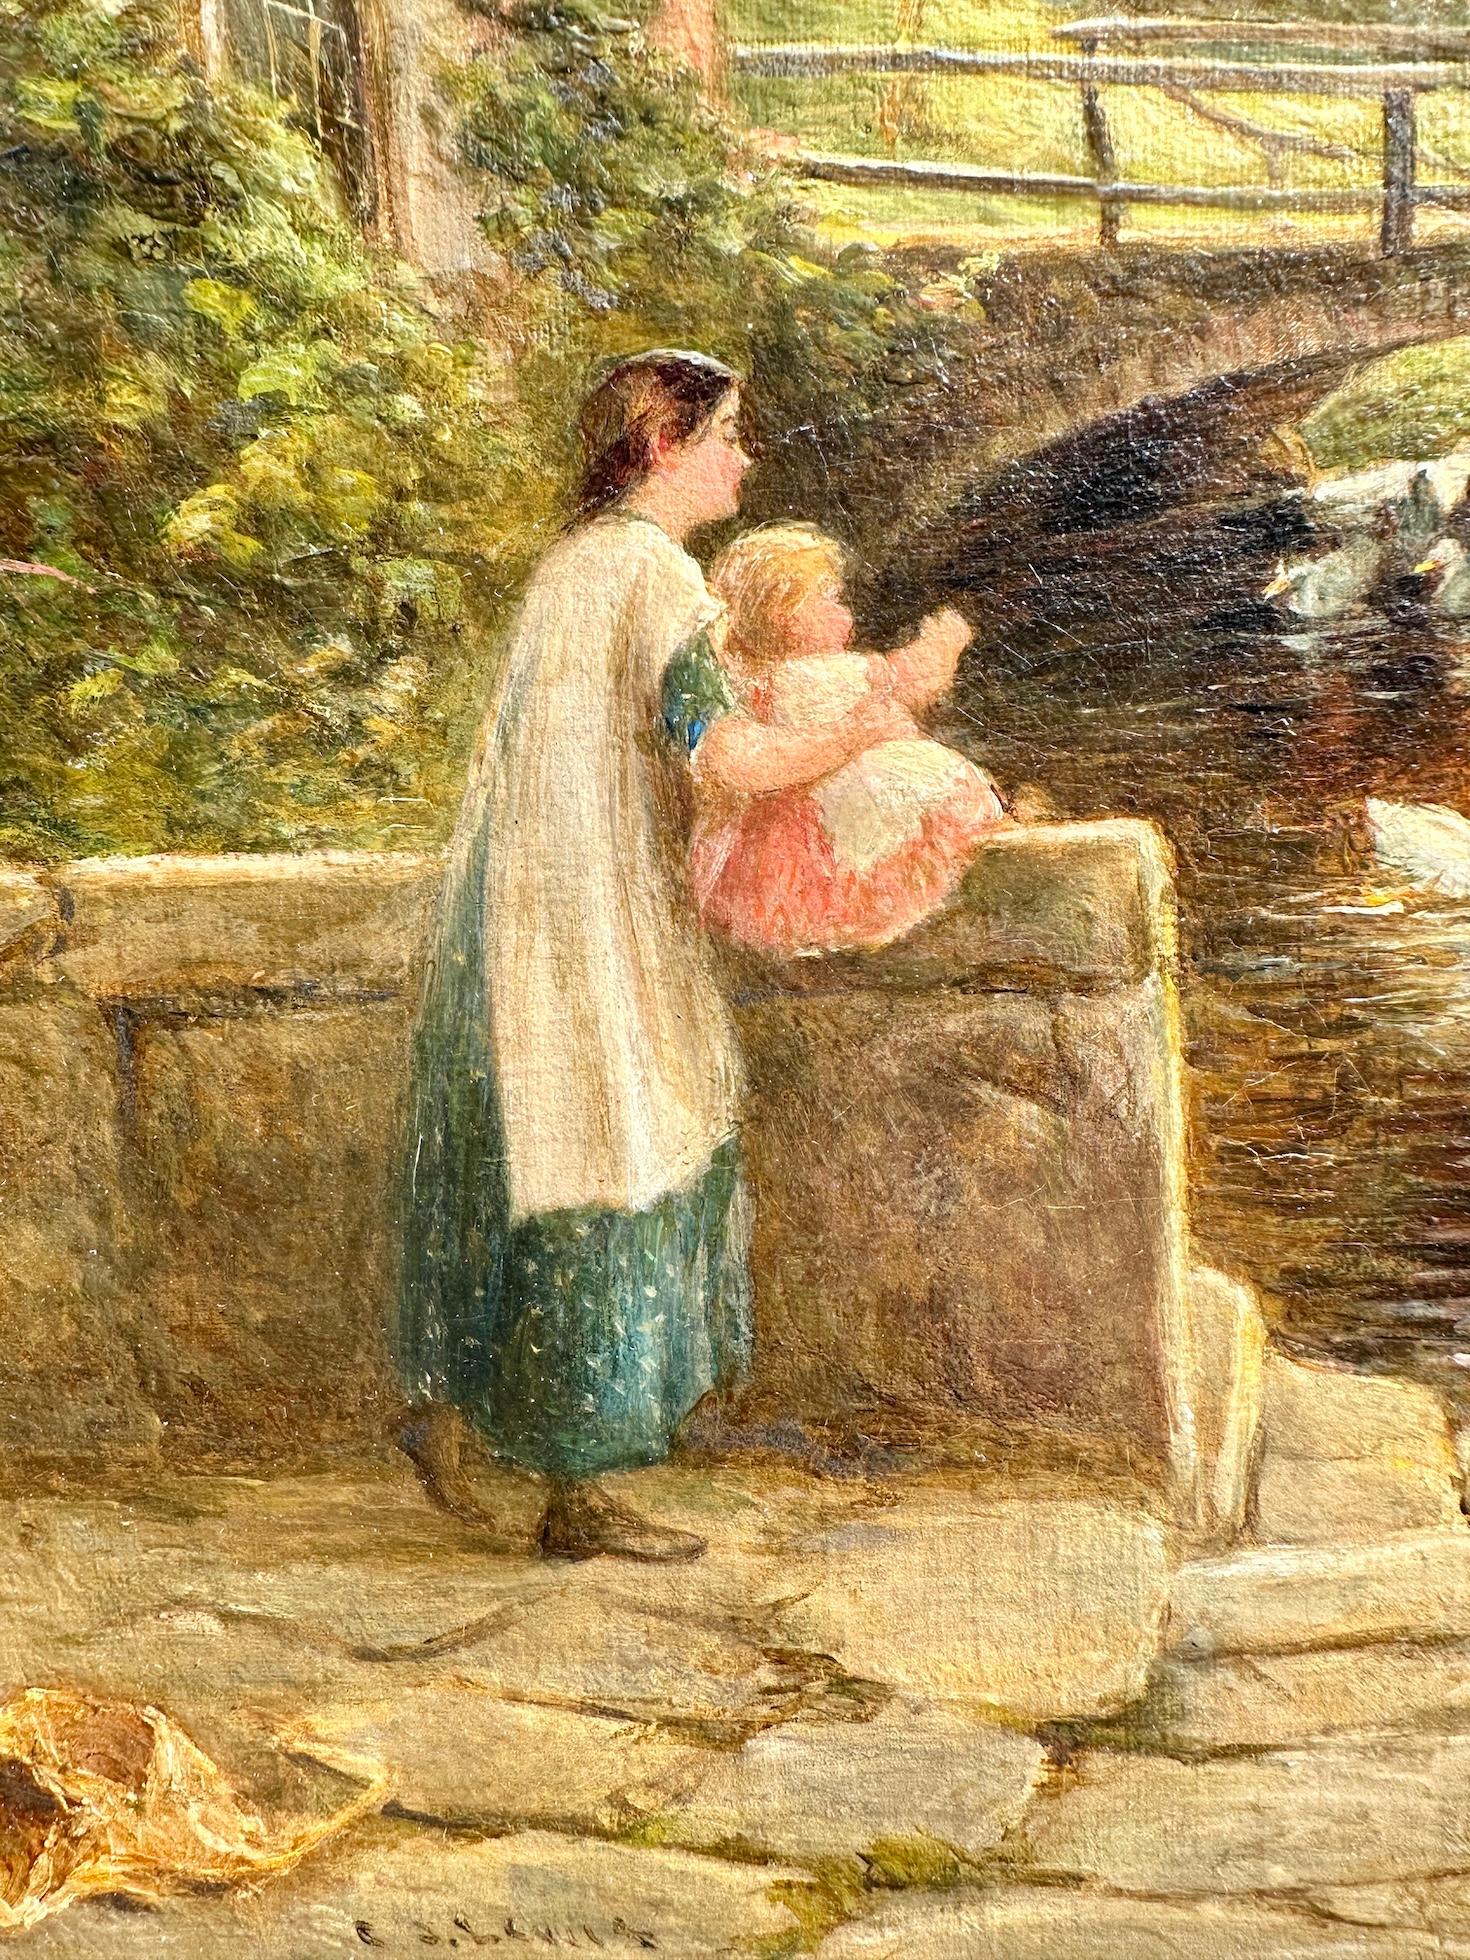 English landscape 19th century Mother and child by a cottage, looking at Ducks  - Painting by Charles James Lewis